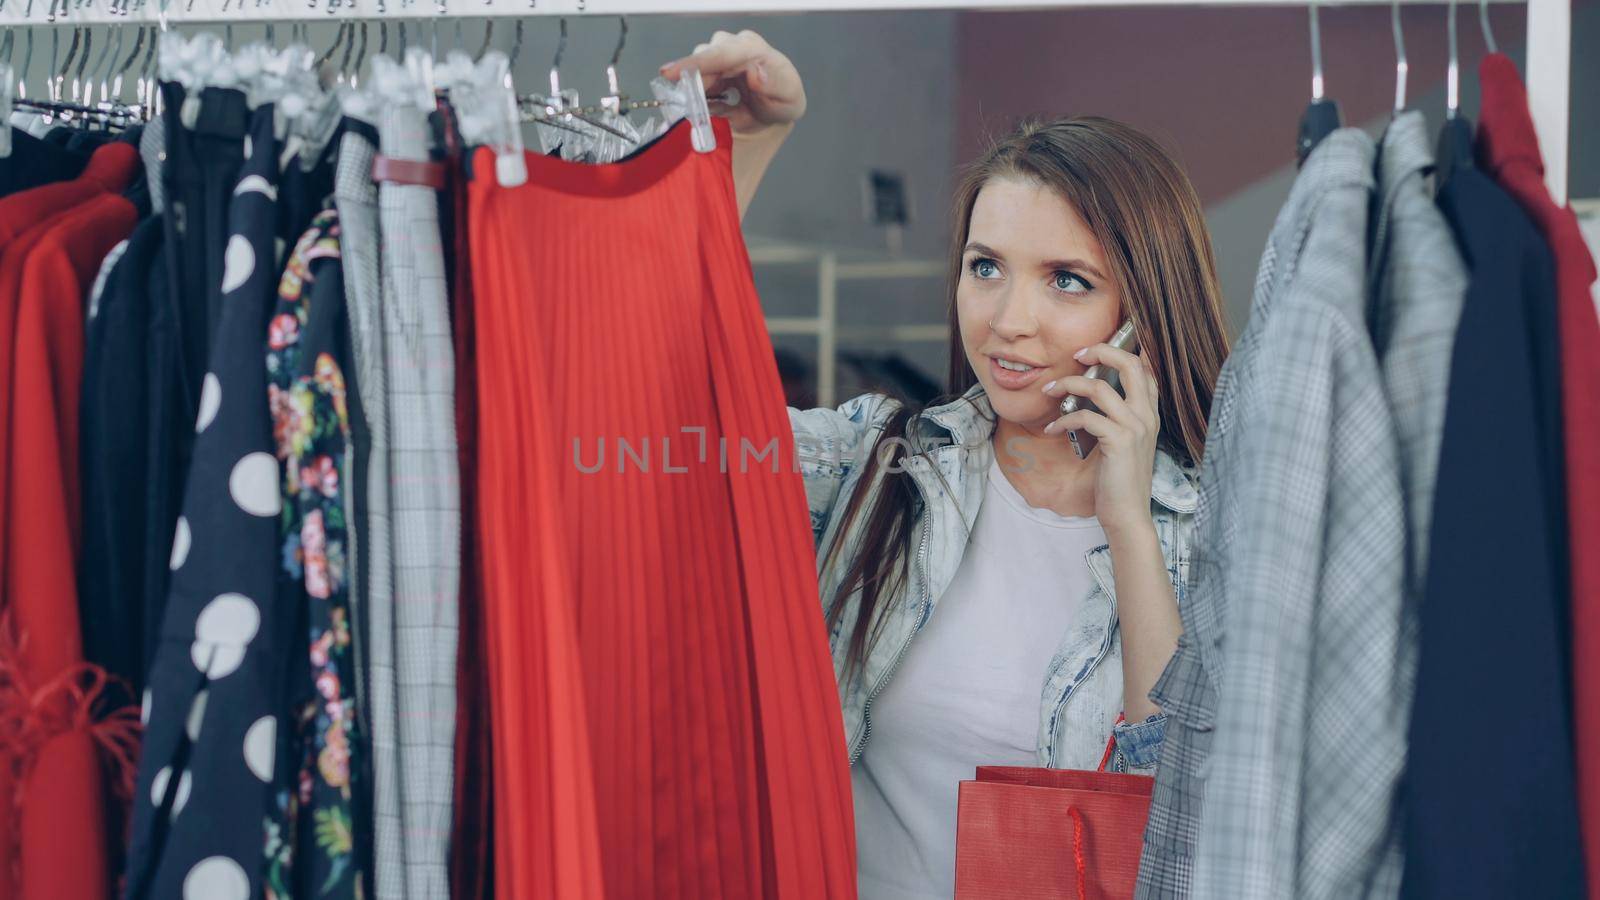 Attractive girl choosing clothes in modern shop and talking on mobile phone. Close-up shot of colourful skirts and jackets on hangers. by silverkblack